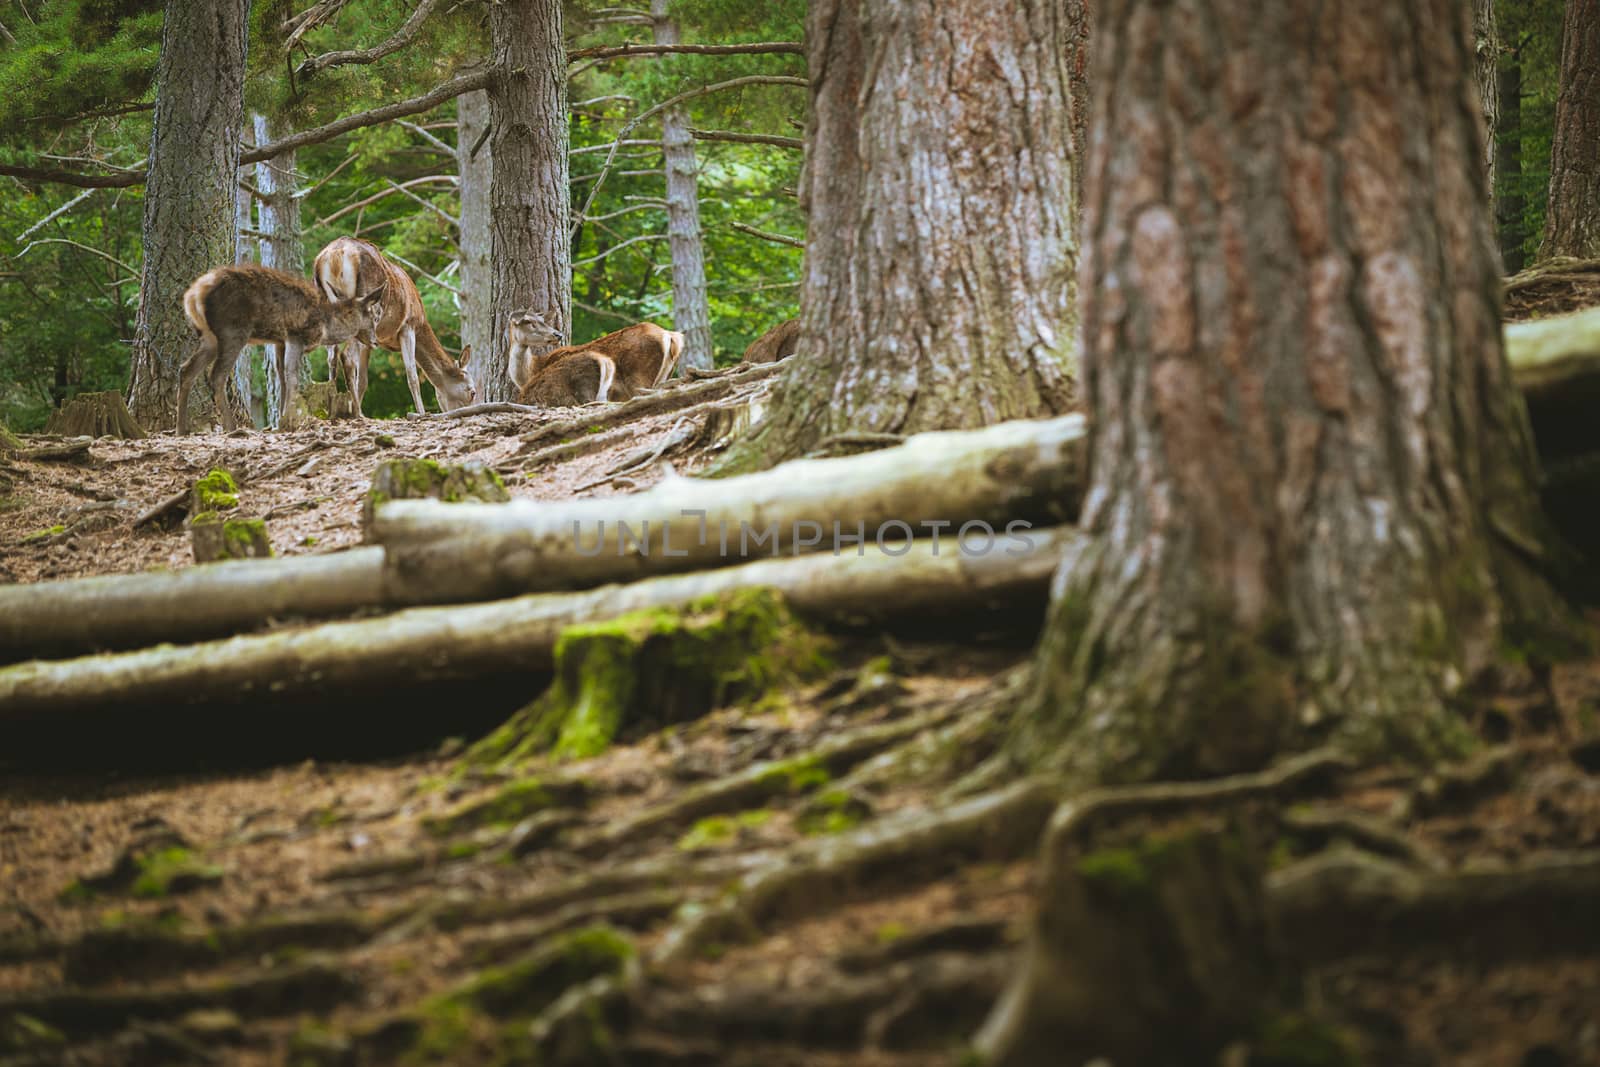 family of deer eating placidly among the trees of the forest, in the foreground you can see trunks and roots of the trees